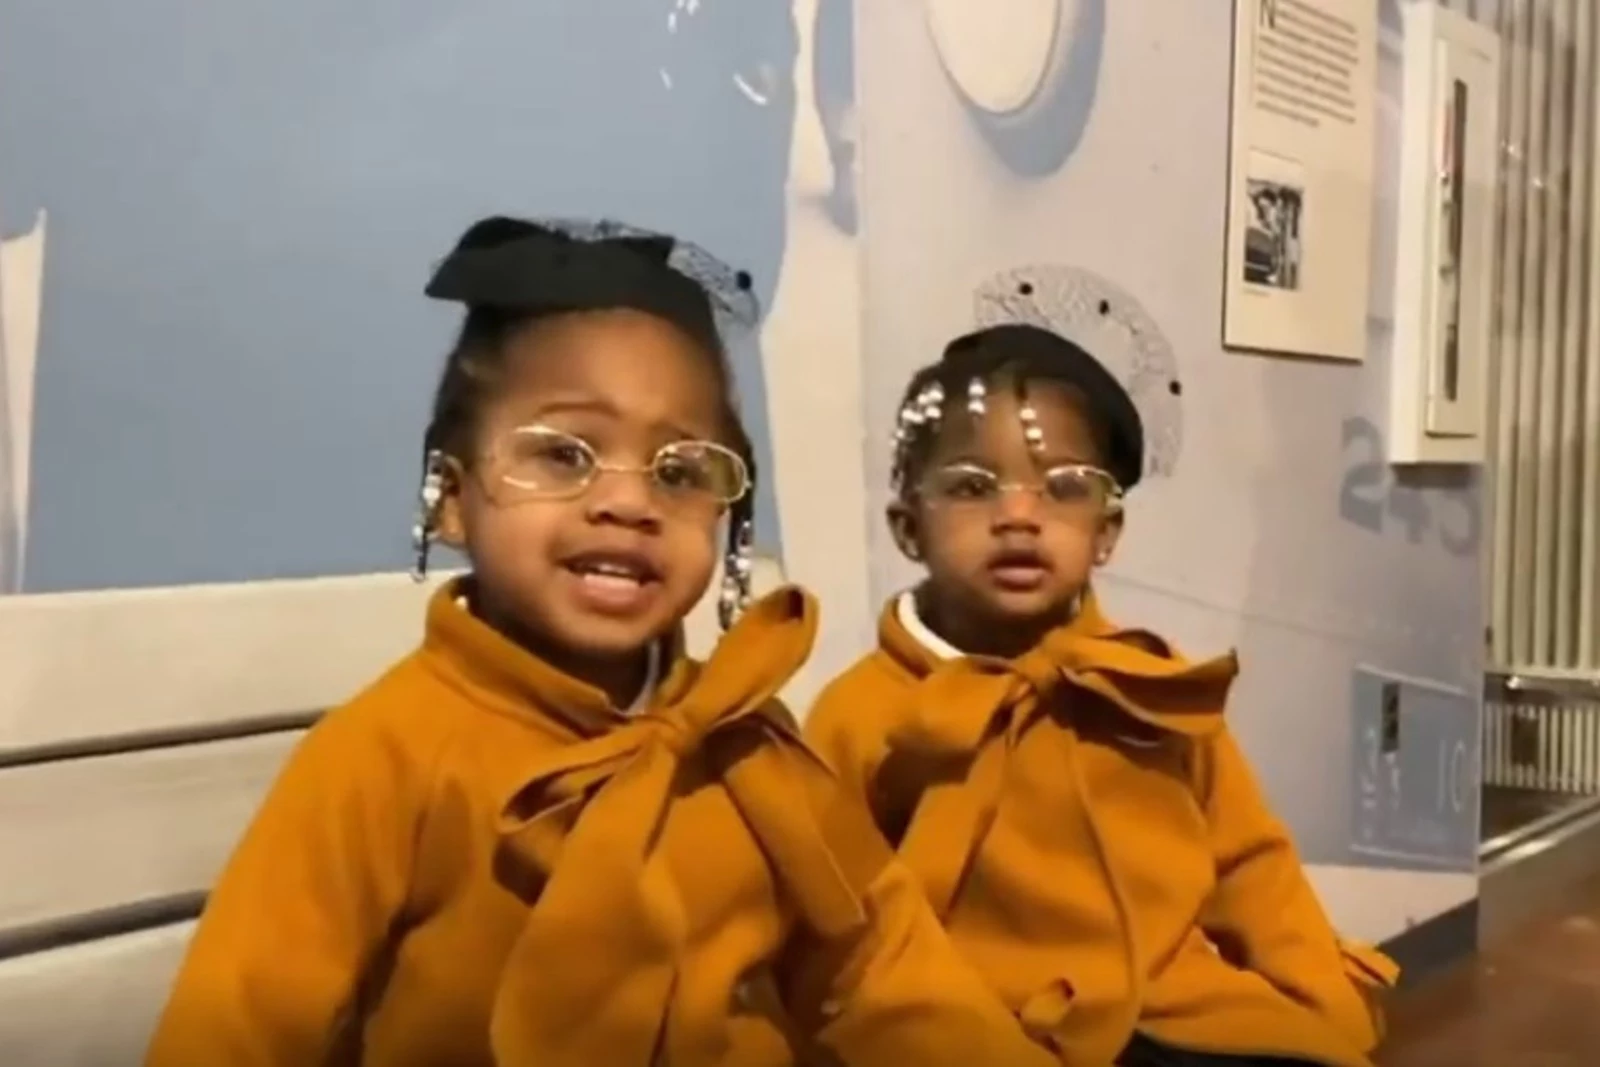 Michigan Girls Honor Rosa Parks as They Visit Henry Ford Museum